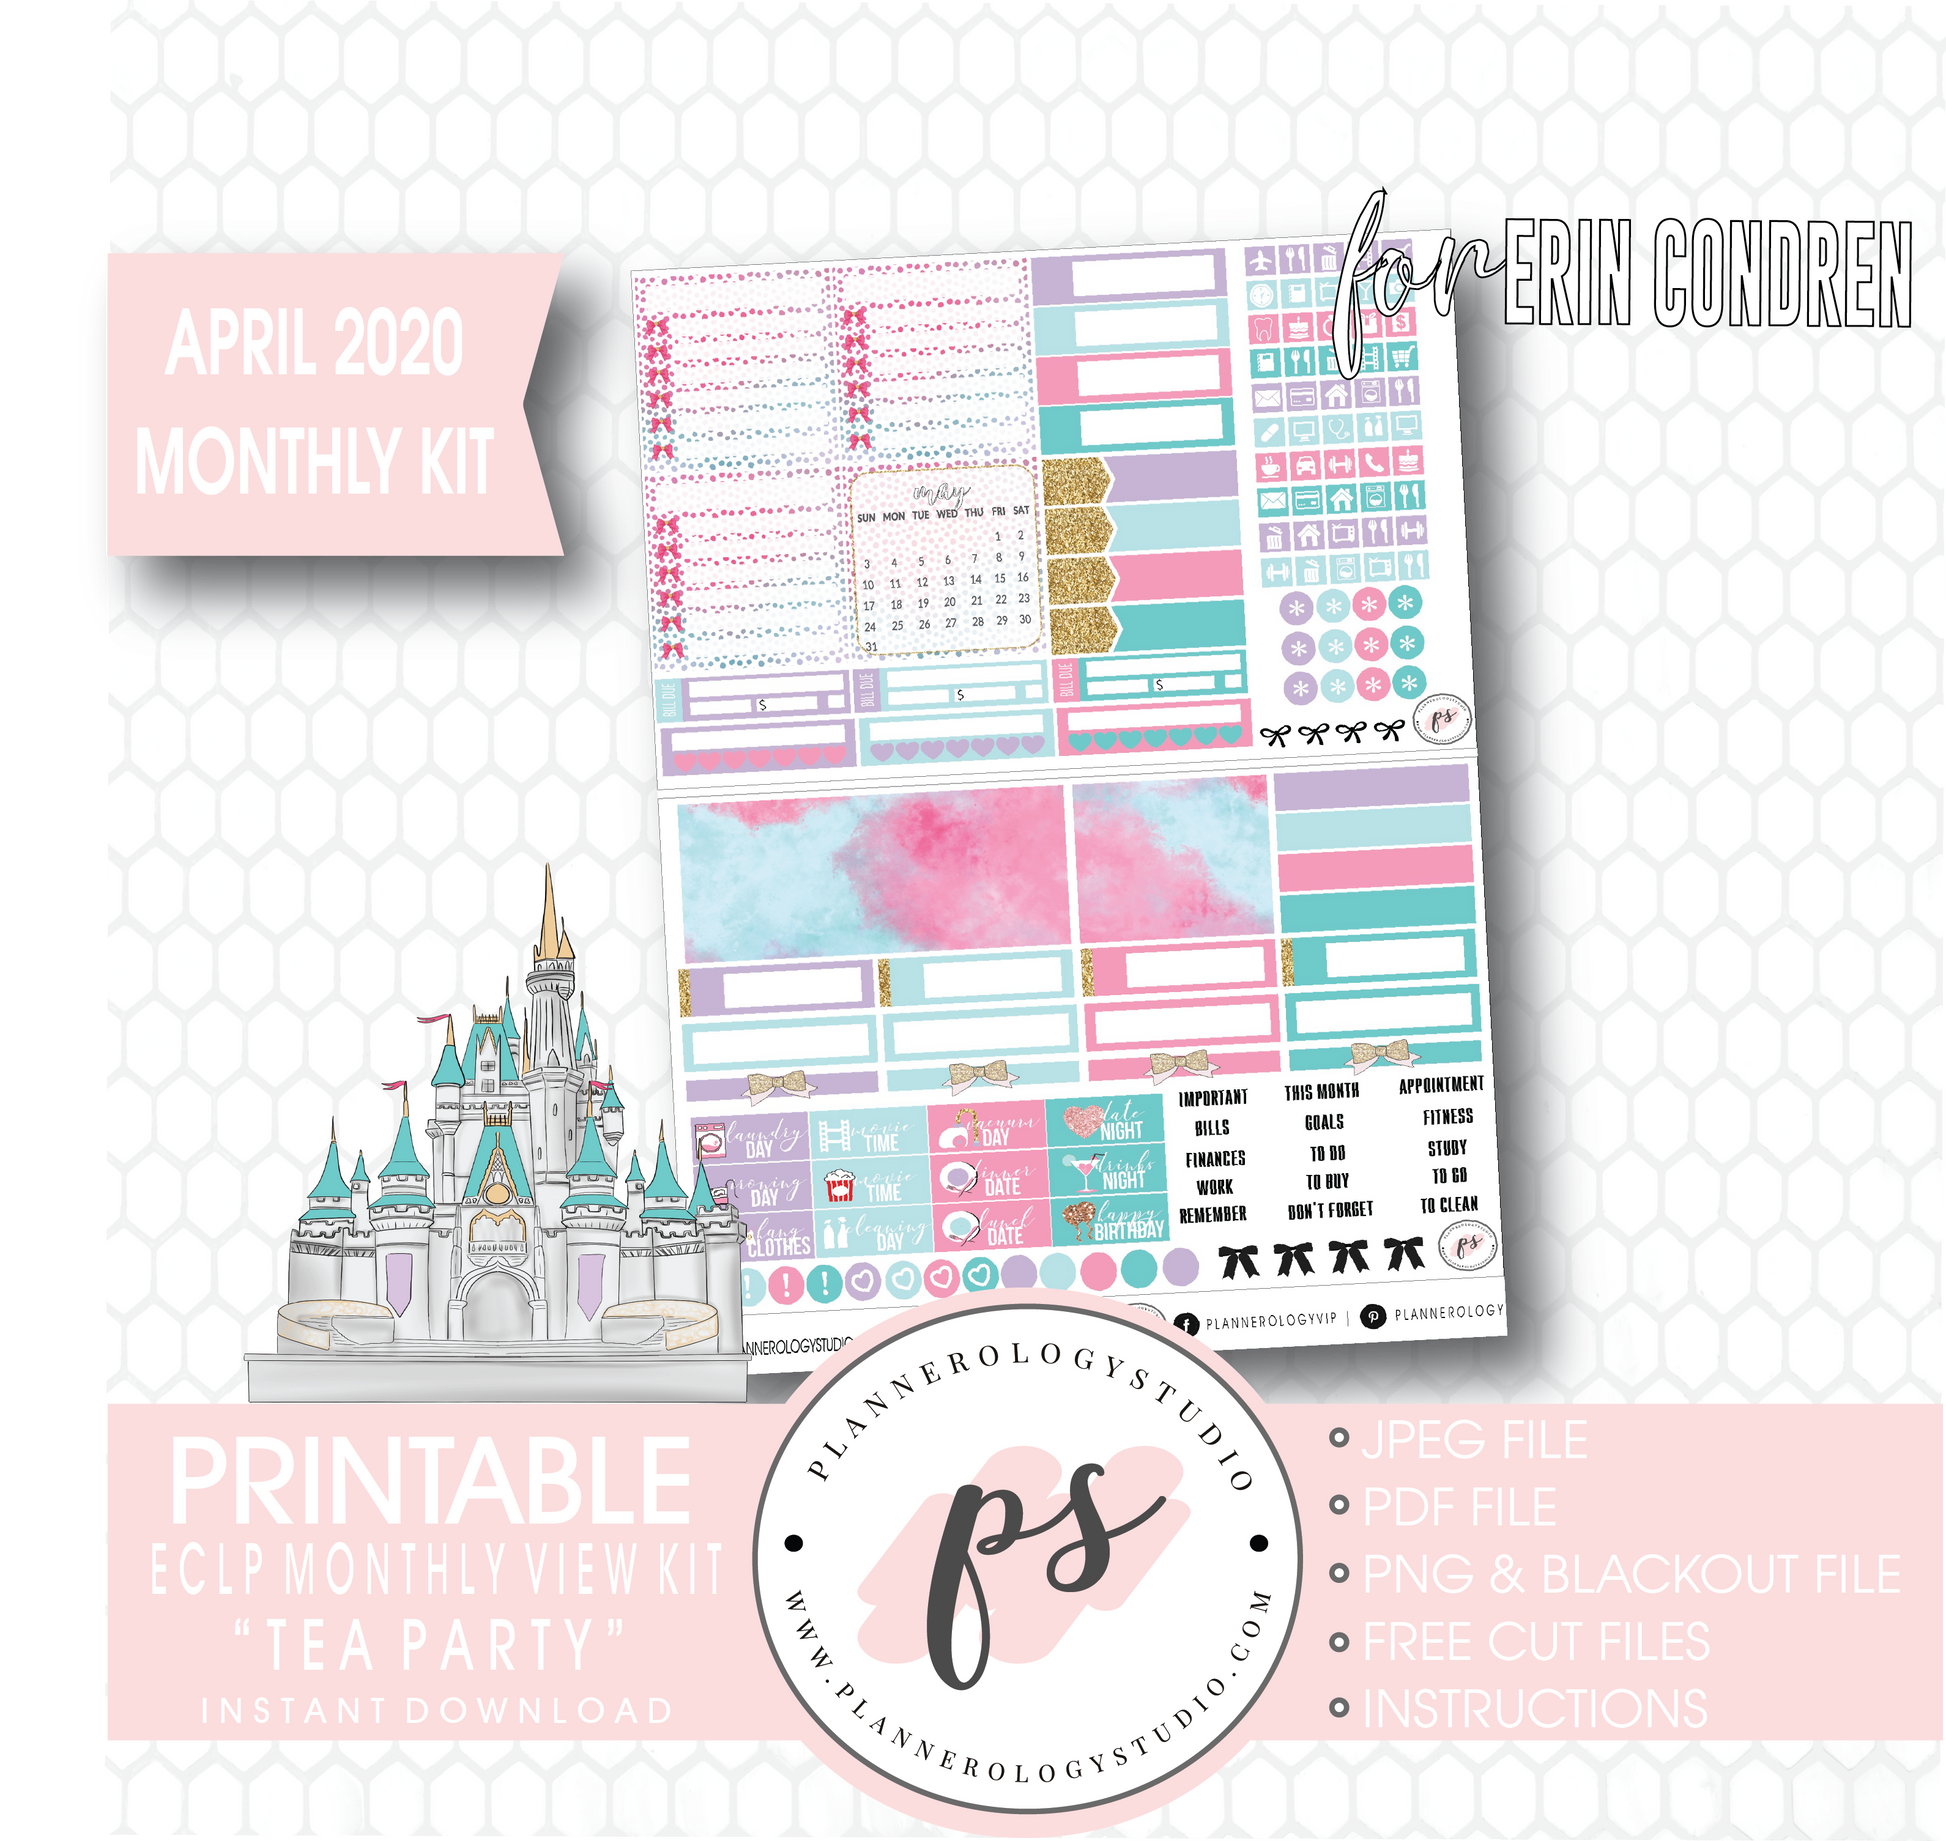 Tea Party April 2020 Monthly View Kit Digital Printable Planner Stickers (for use with Classic Happy Planner) - Plannerologystudio